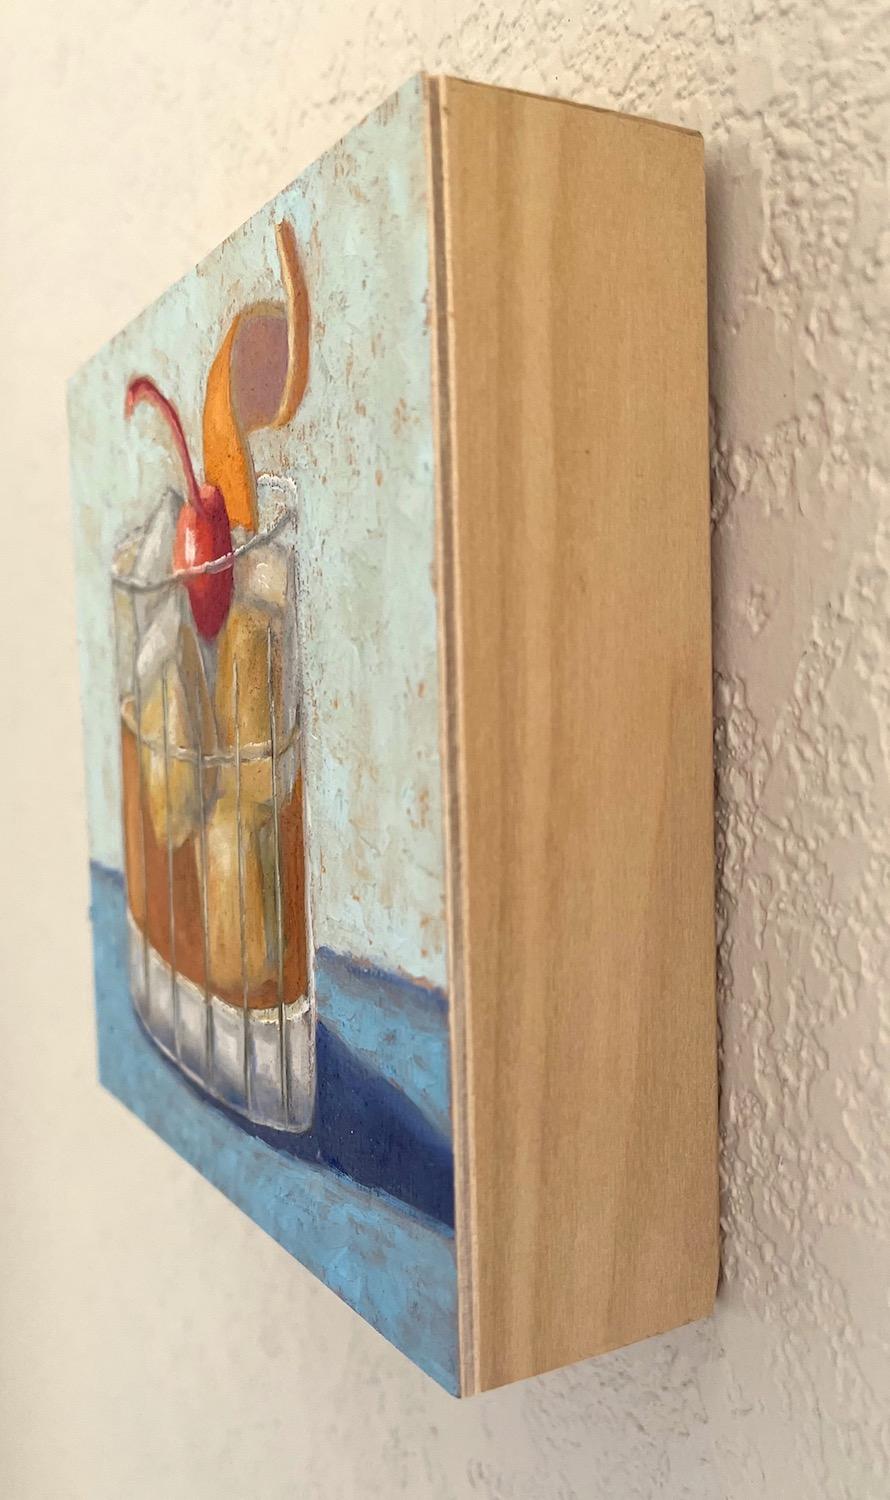 <p>Artist Comments<br>A scotch on the rocks with a cherry and orange twist invites leisure and relaxation. Set against a background with visible brushstrokes, the cocktail glass exudes elegance. The artwork emphasizes a harmonious composition while